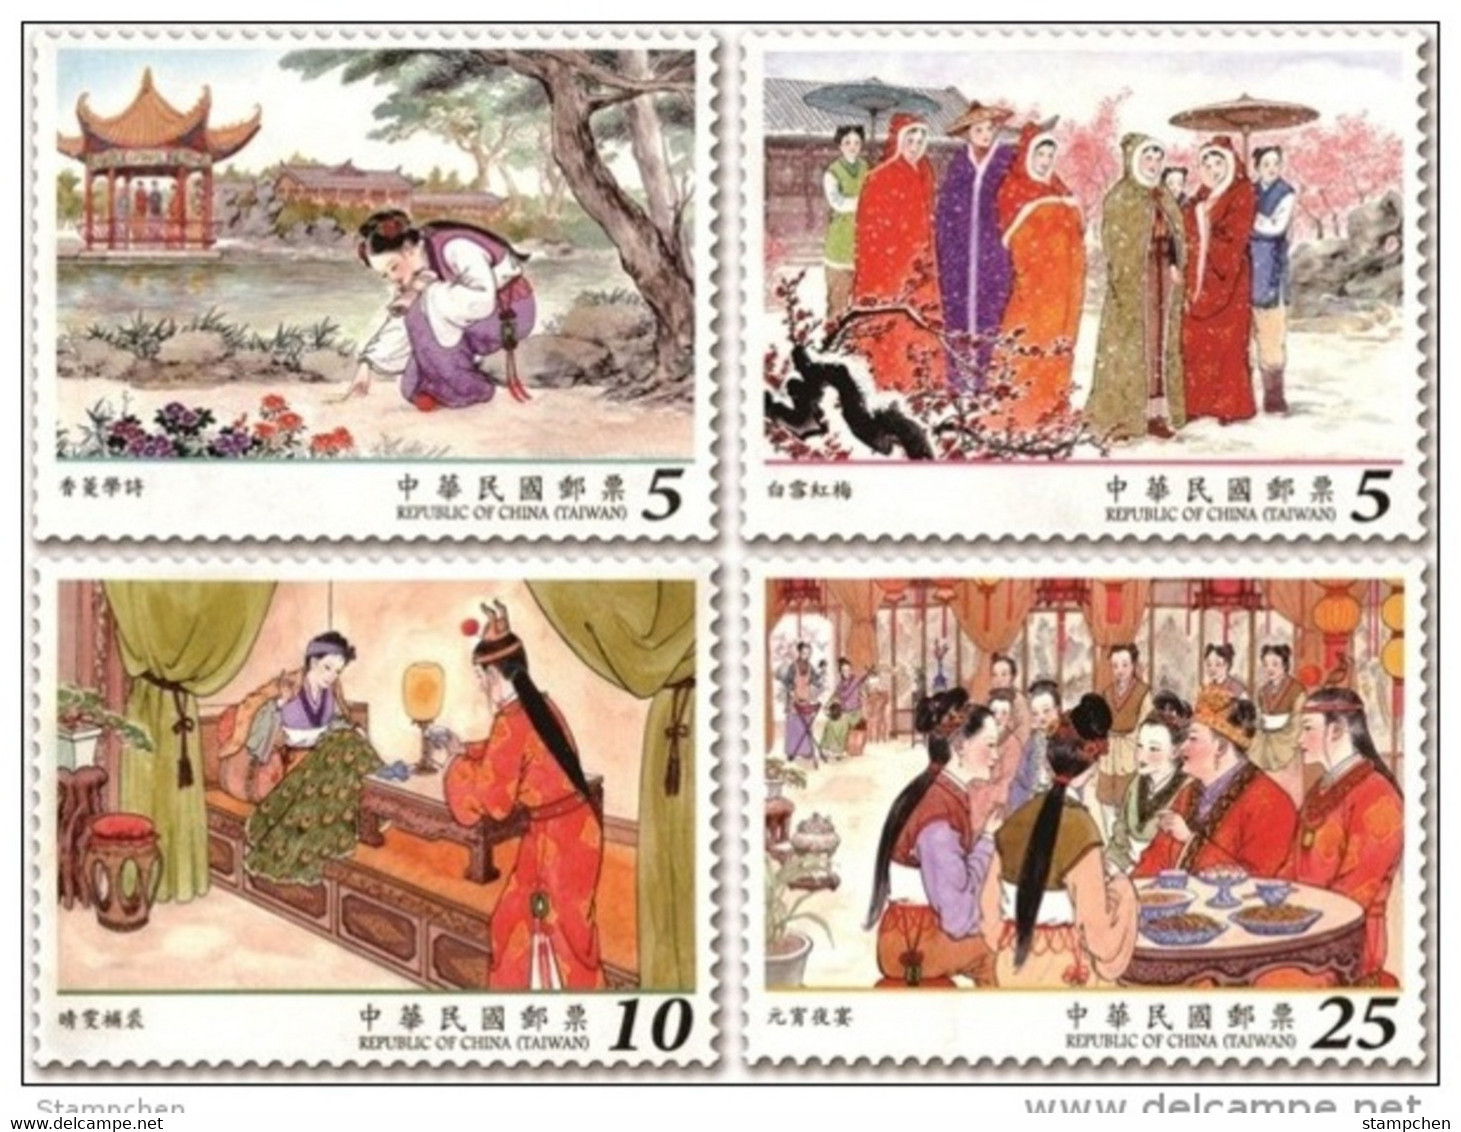 Taiwan 2016 Red Chamber Dream Stamps Book Garden Novel Fairy Tale Lantern Festival Poetry Plum Flower Snow Pavilion - Unused Stamps